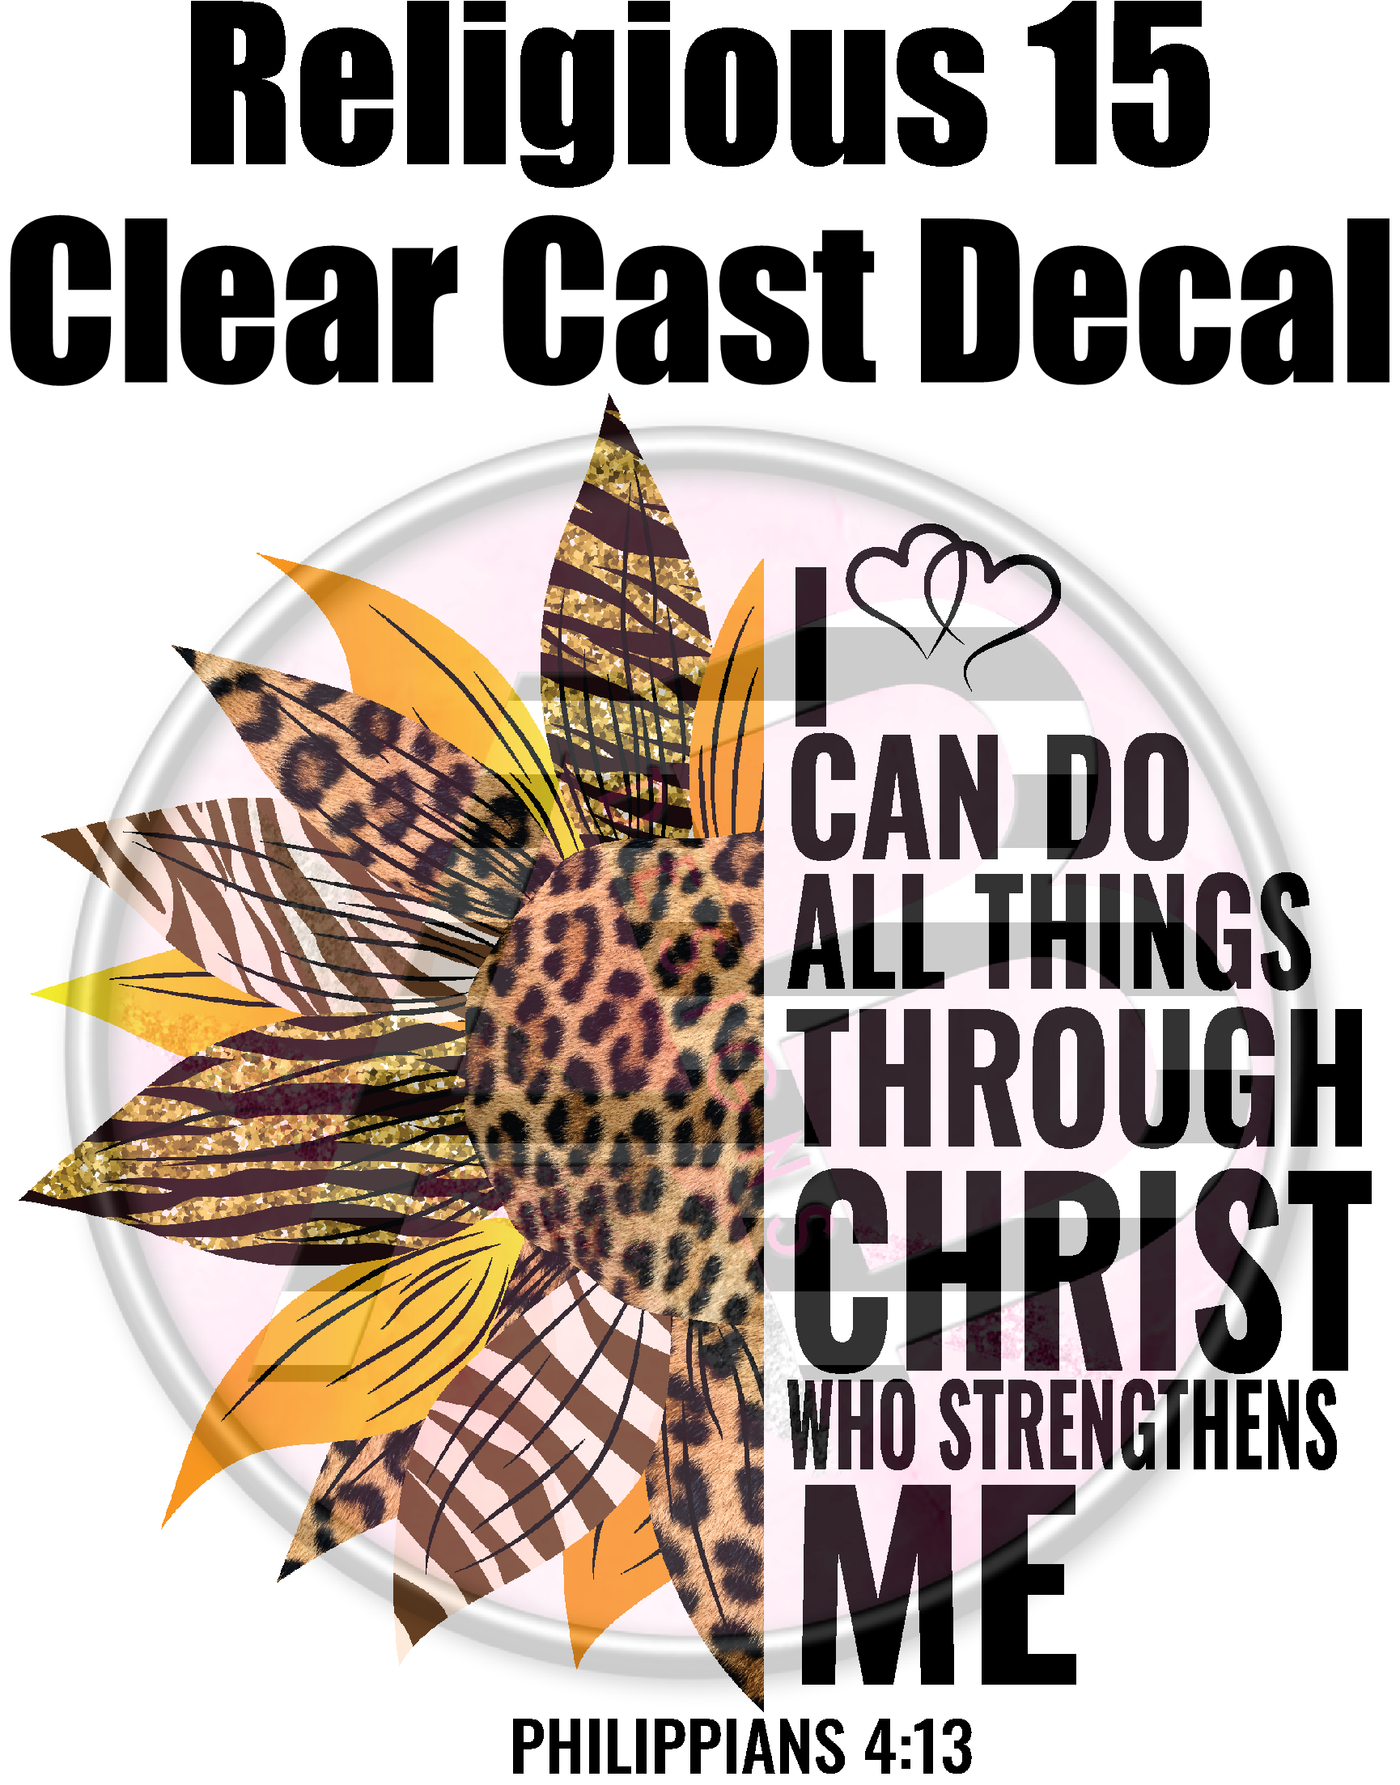 Religious 15 - Clear Cast Decal